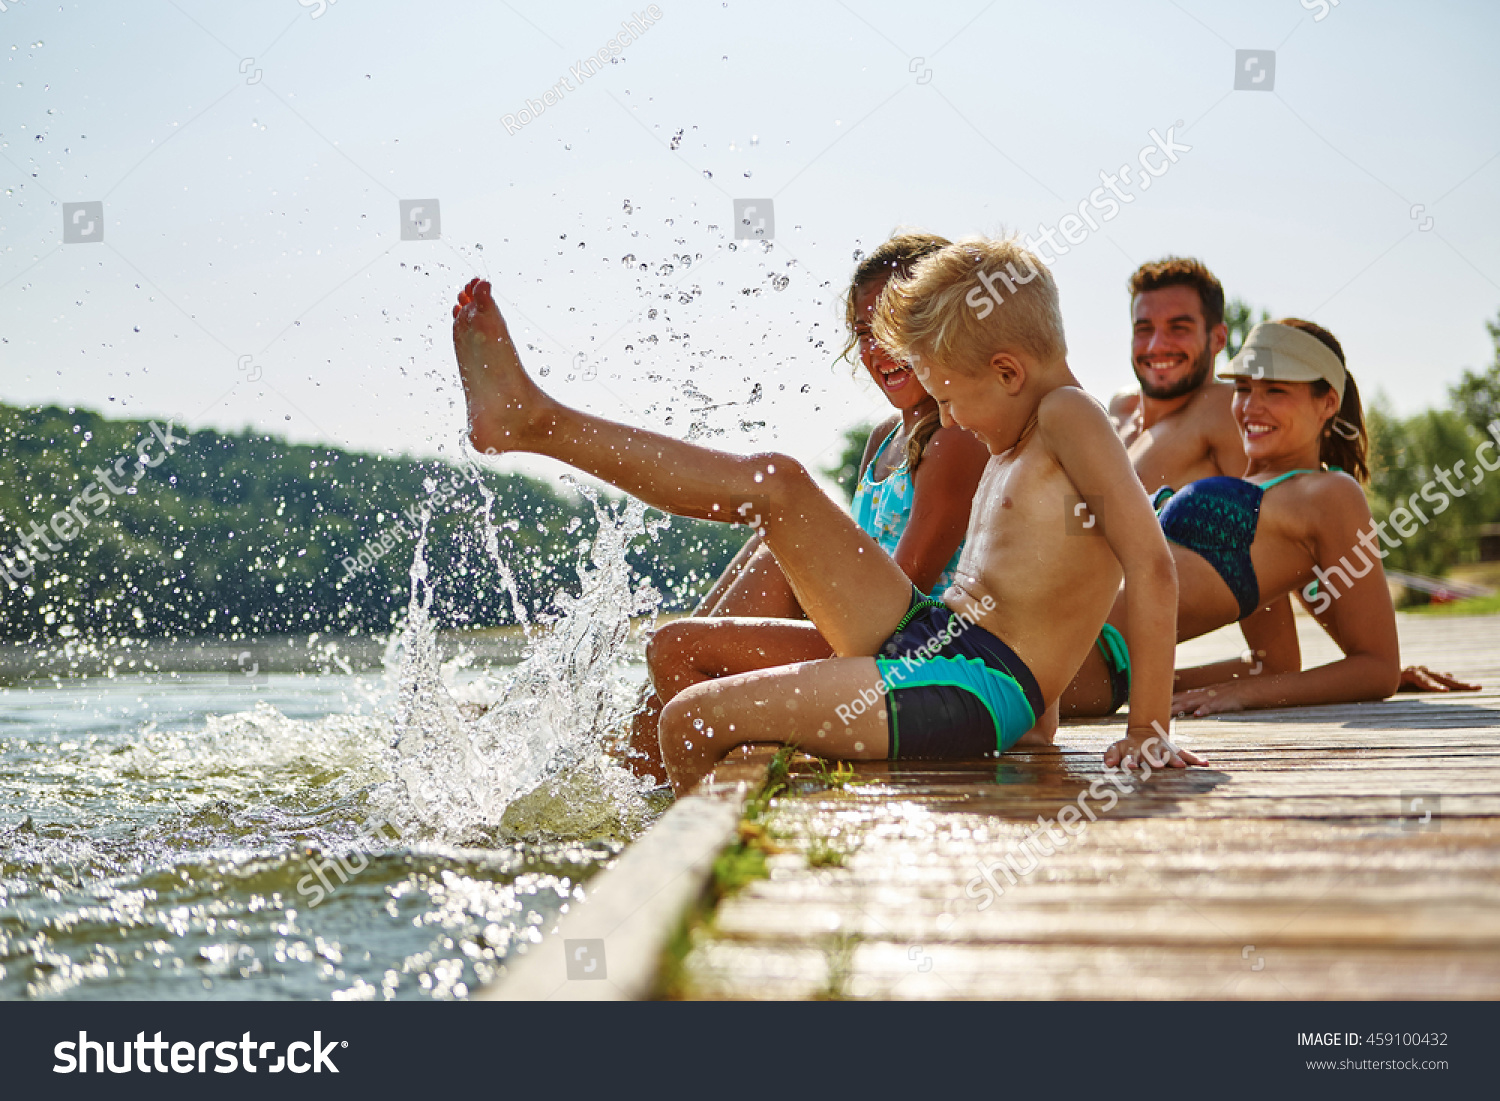 Family bathing and splashing water with their foot at a lake in summer #459100432